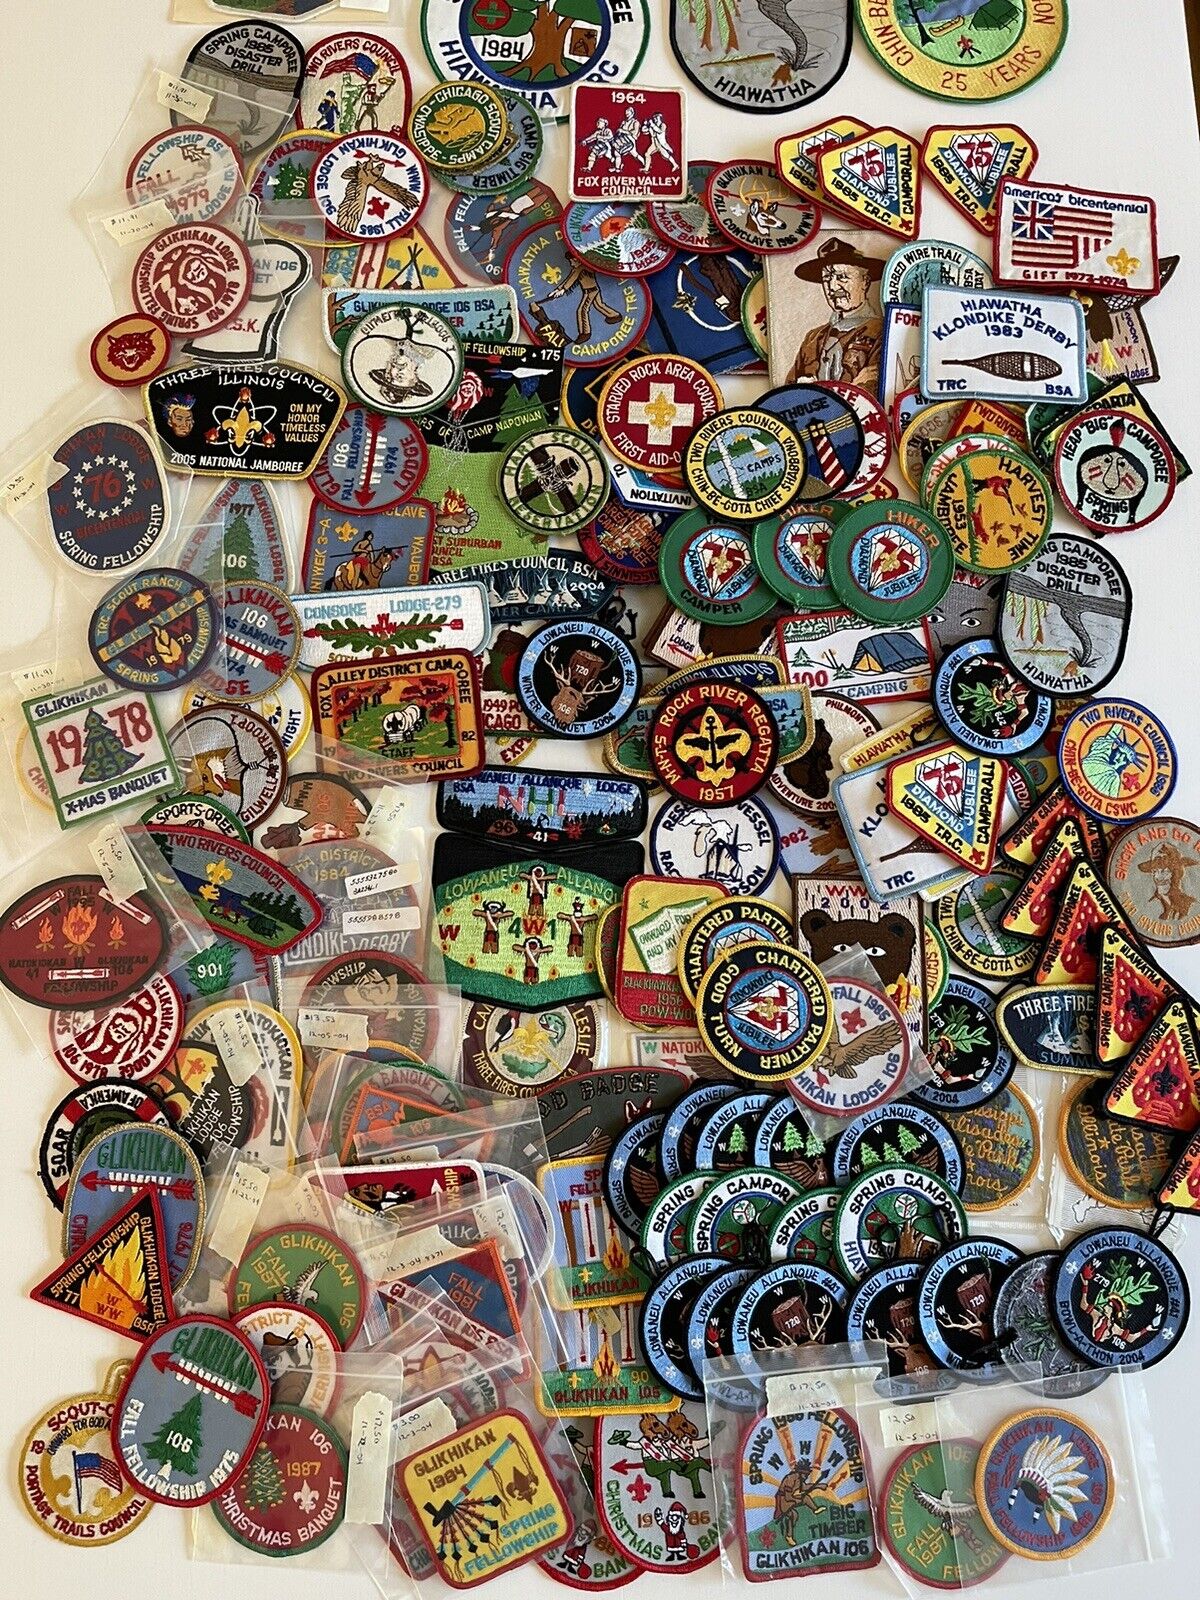 175+ BSA Boy Scouts Patches Many Decades Order Of The Arrow, Camporee, More 